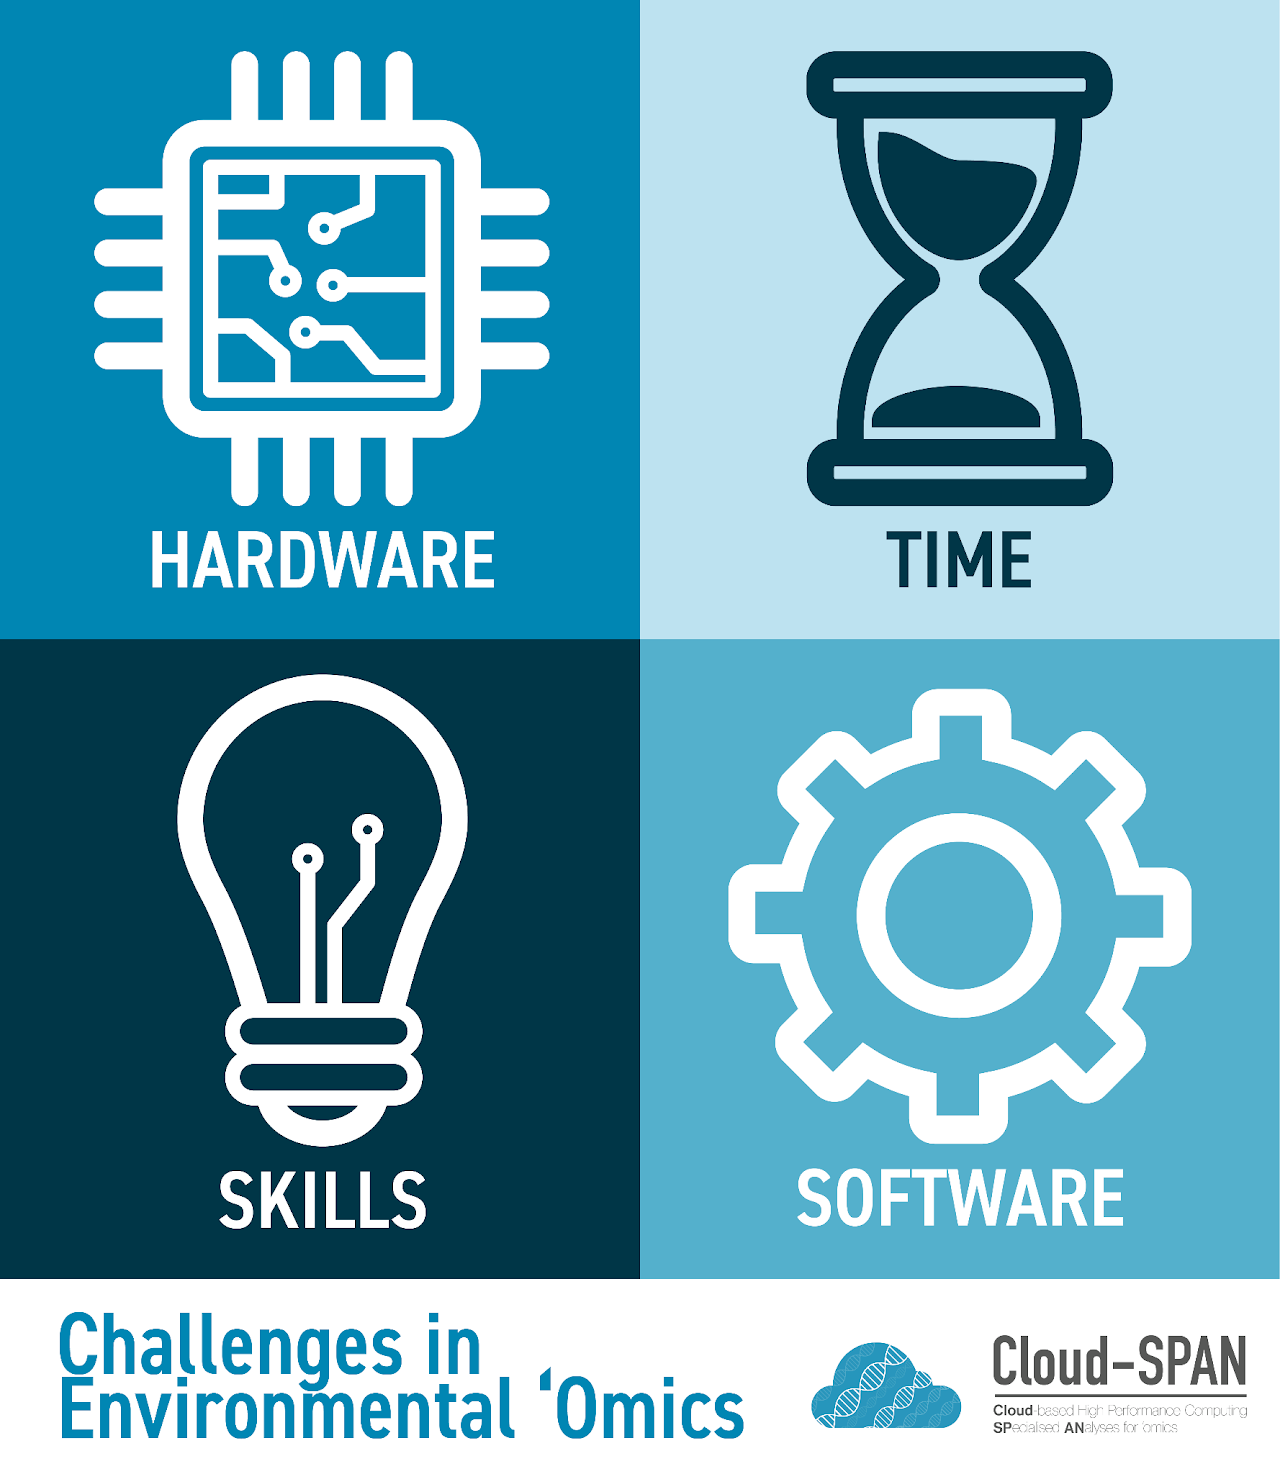 A graphics showing four icons labelled Hardware, Time, Skills and Software, with a note Challenges in Environmental Omics and the Cloud-SPAN logo.